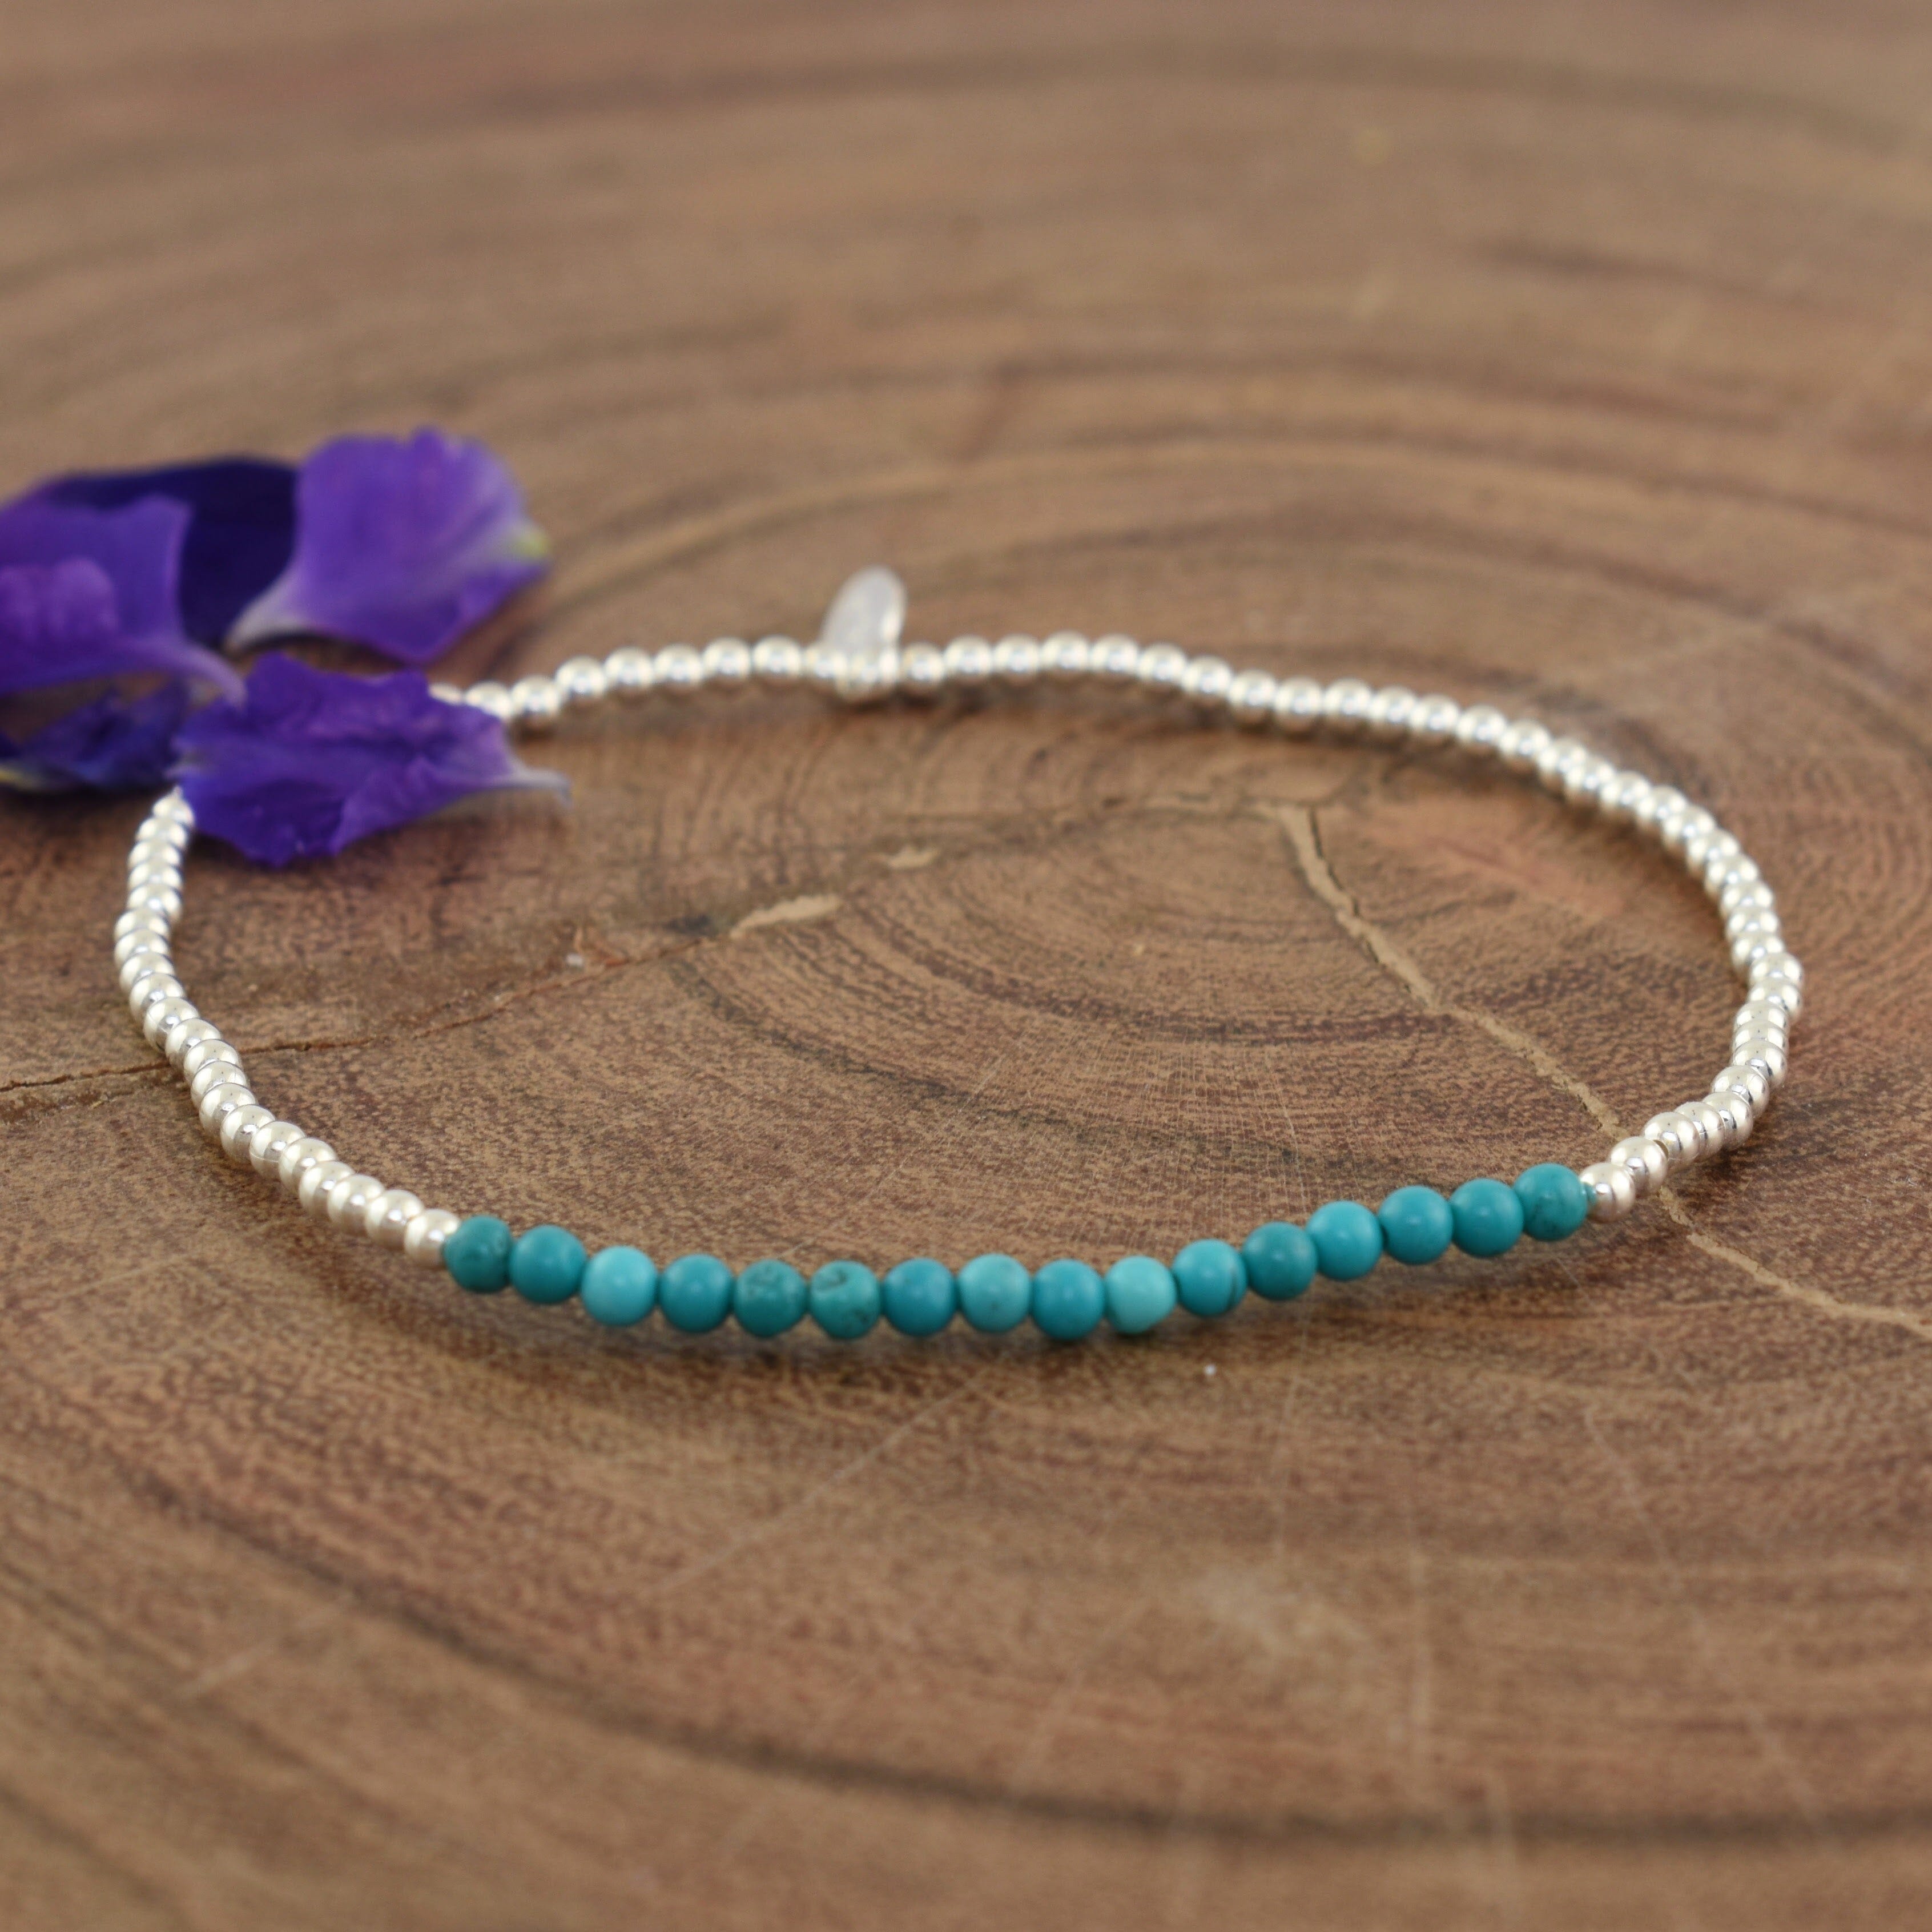 Sterling silver stretch bracelet with turquoise accent beads